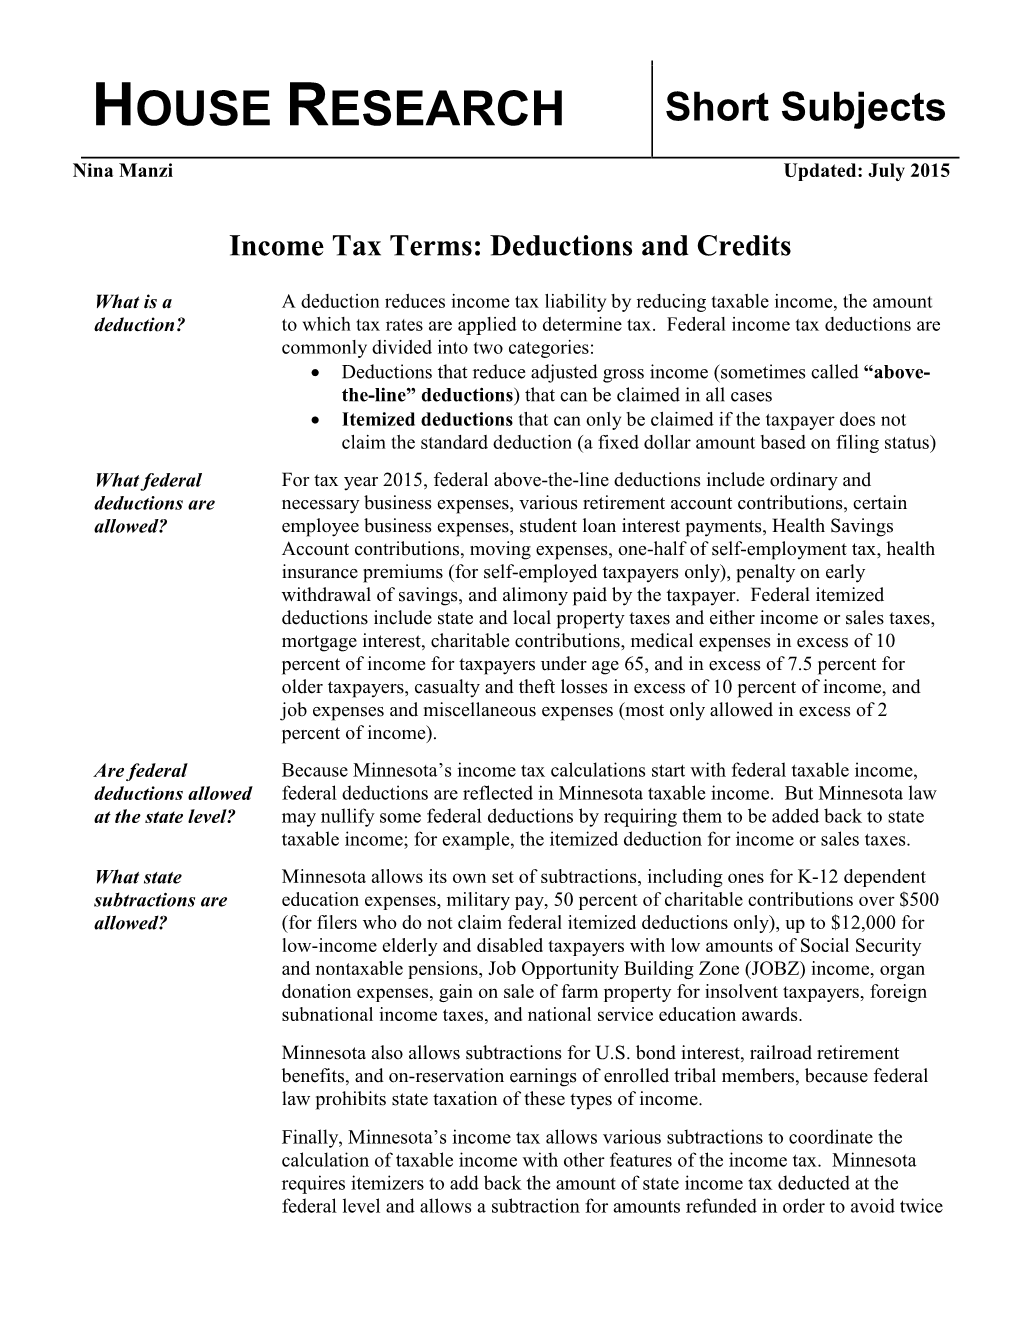 Income Tax Terms: Deductions and Credits